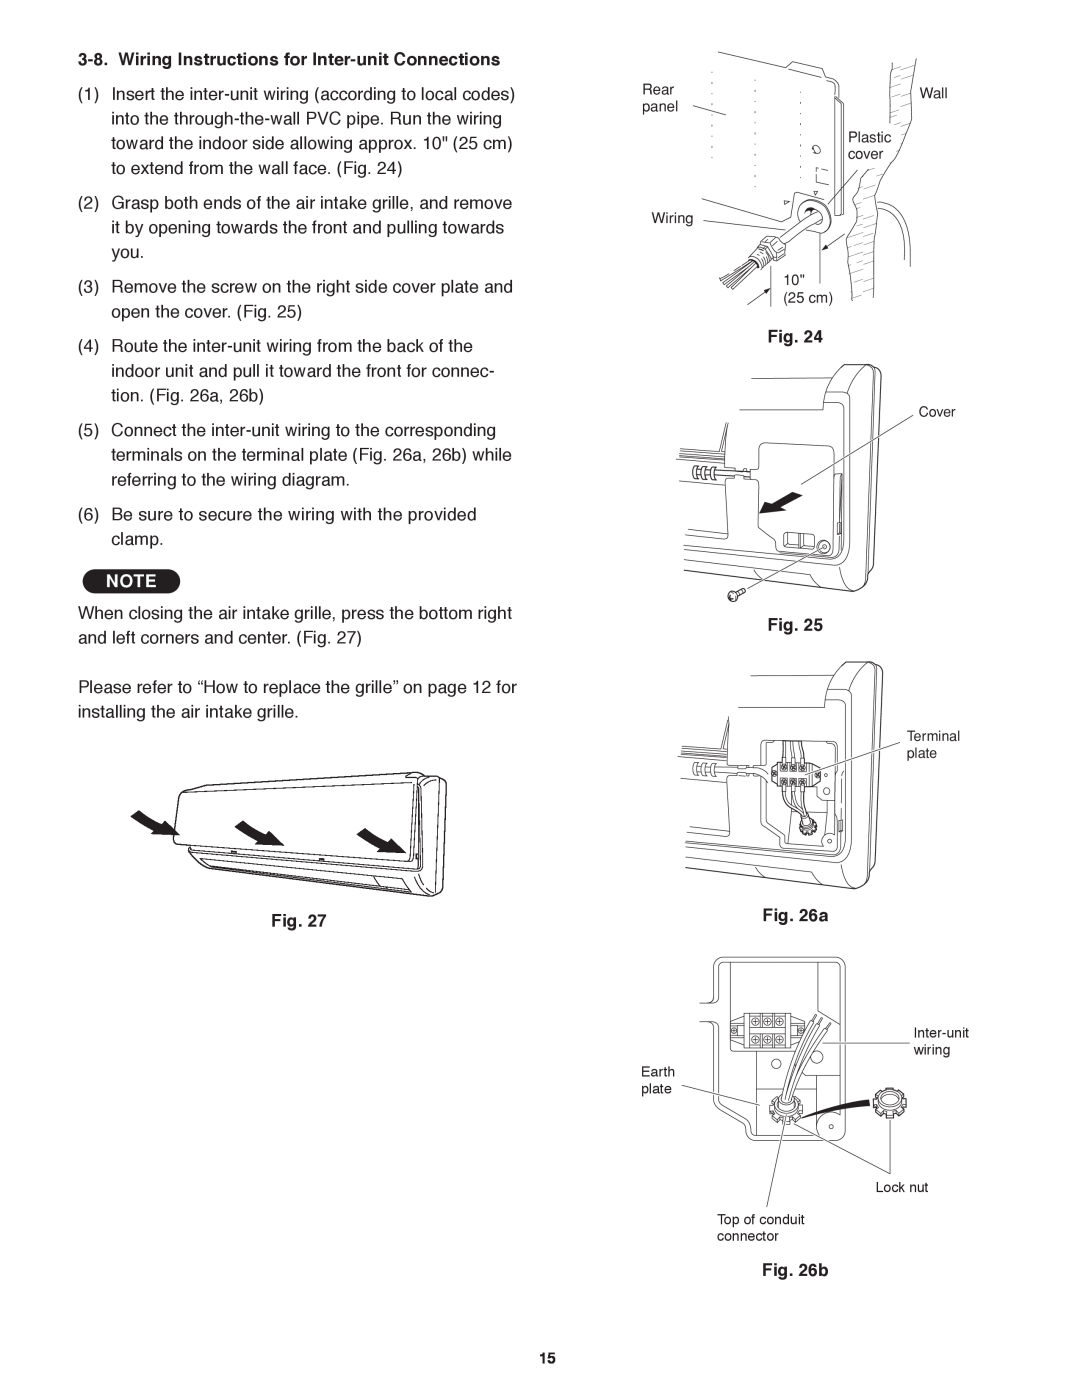 Panasonic CU-KS24NKUA Wiring Instructions for Inter-unitConnections, Fig, b, Rear, Wall, panel, Cover, Terminal plate 